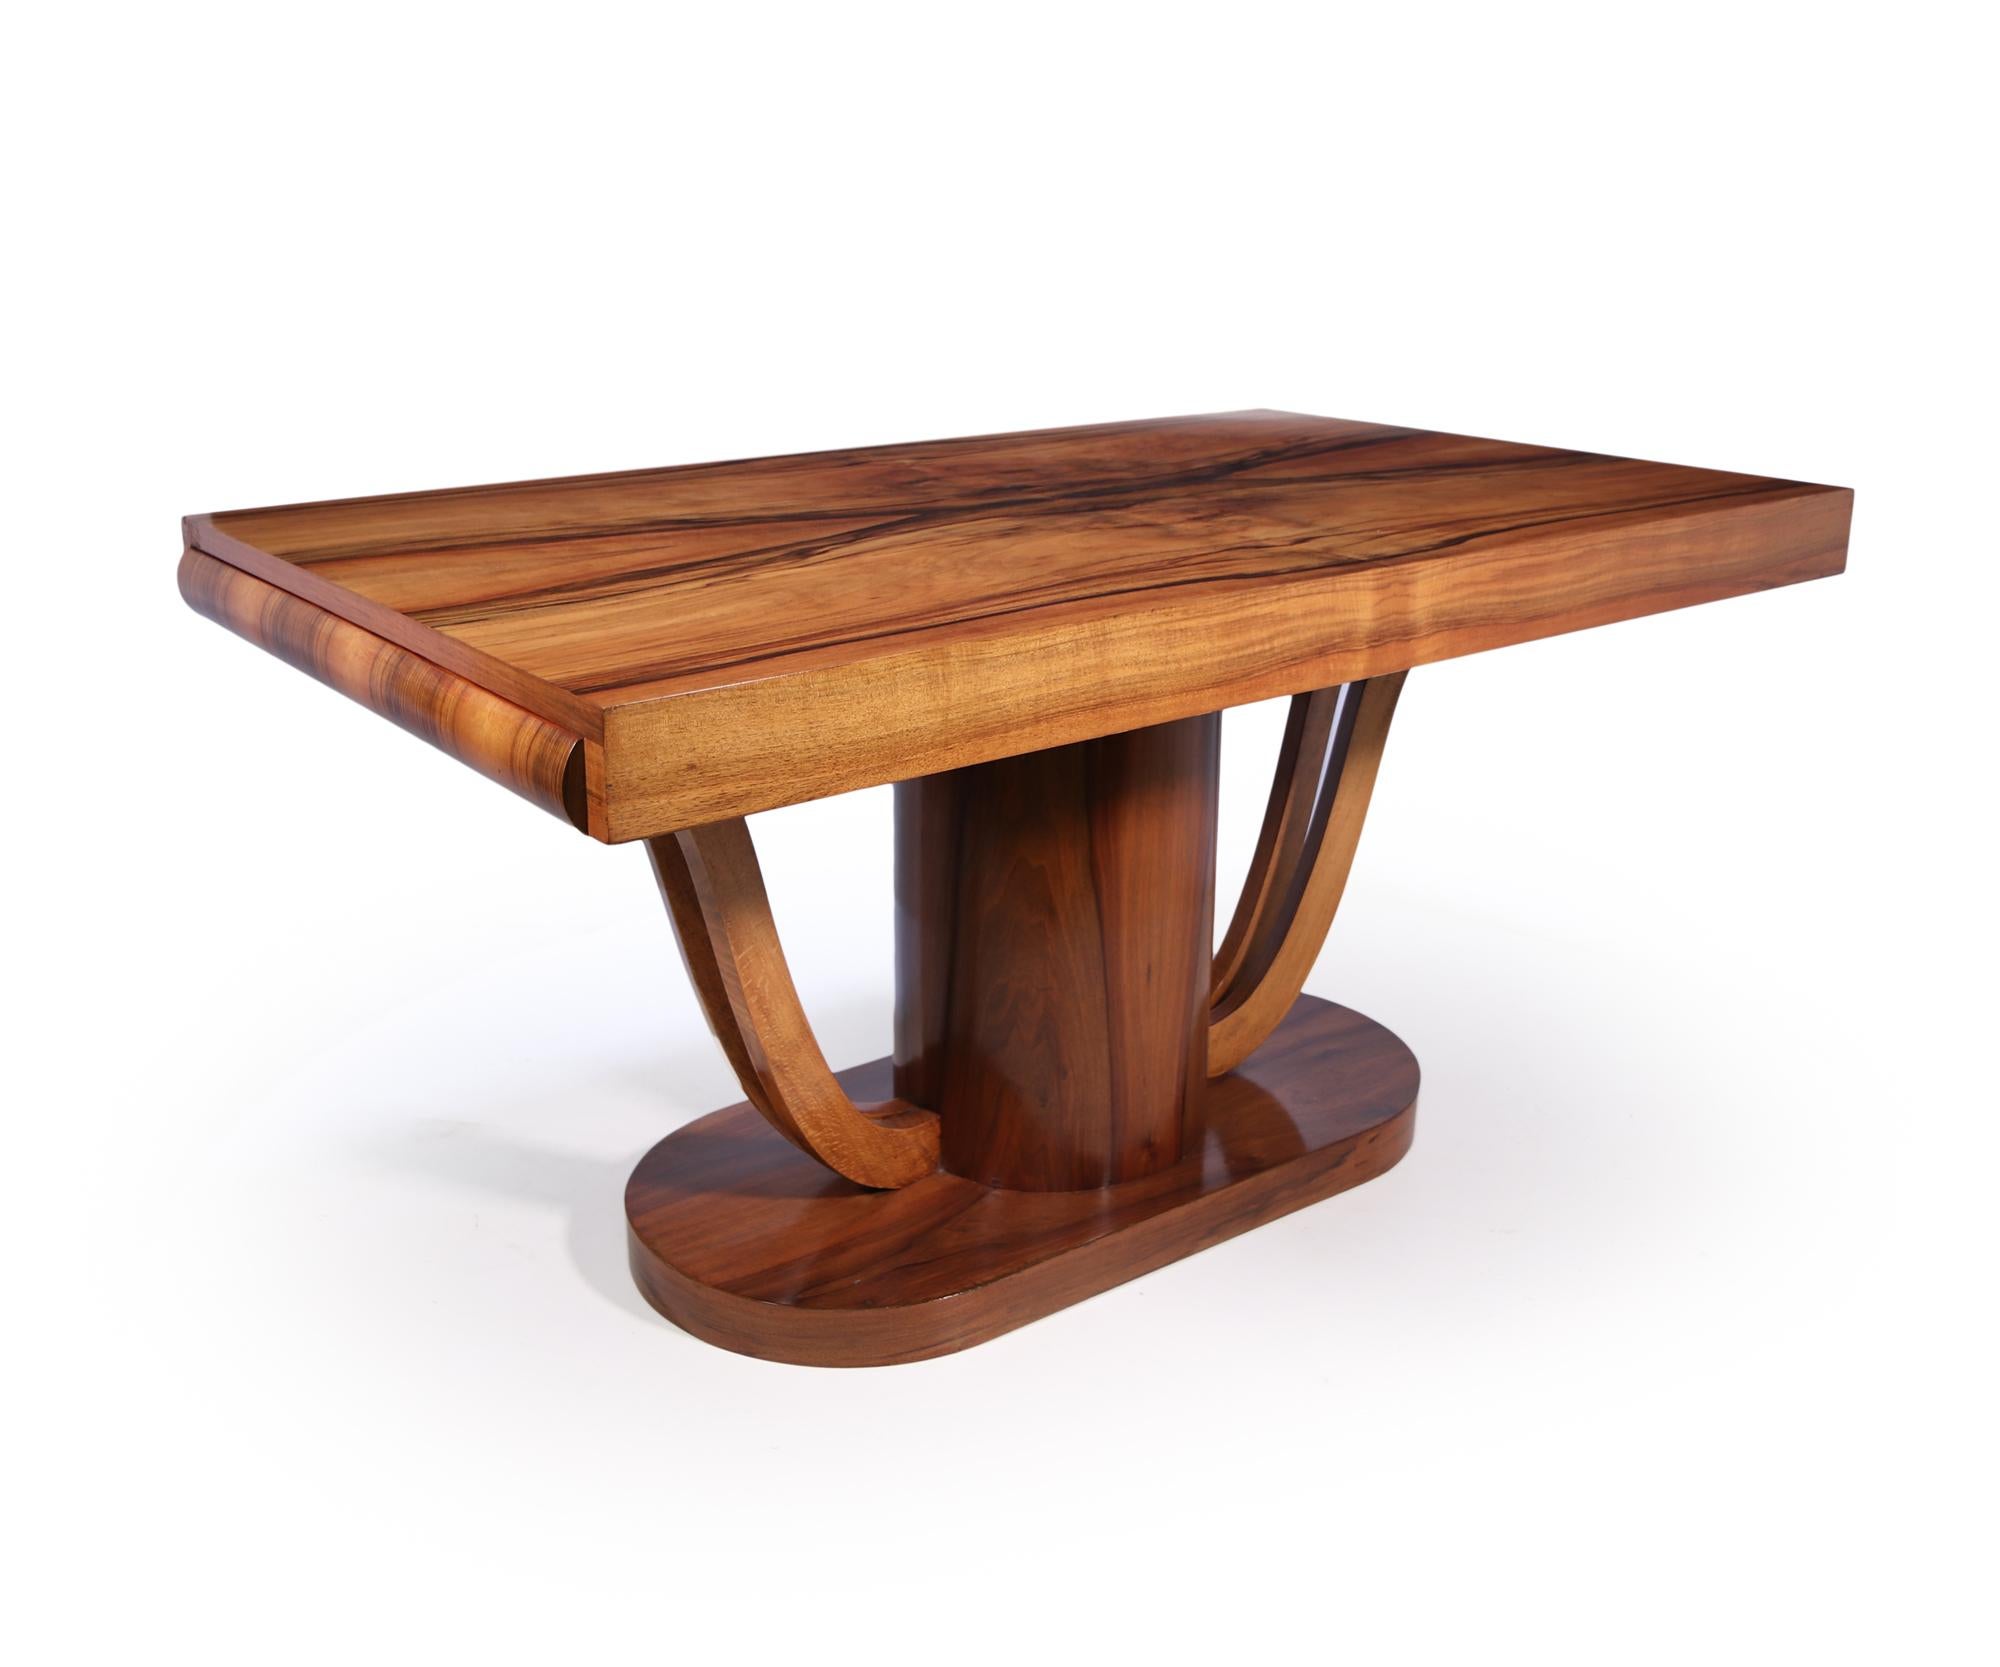 A walnut dining table on a central pedestal base good sized top with drawers in either end

the table has been restored where necessary and fully polished by hand

Age: 1930

Style: Art Deco

Material: Walnut

Origin : France

Condition: